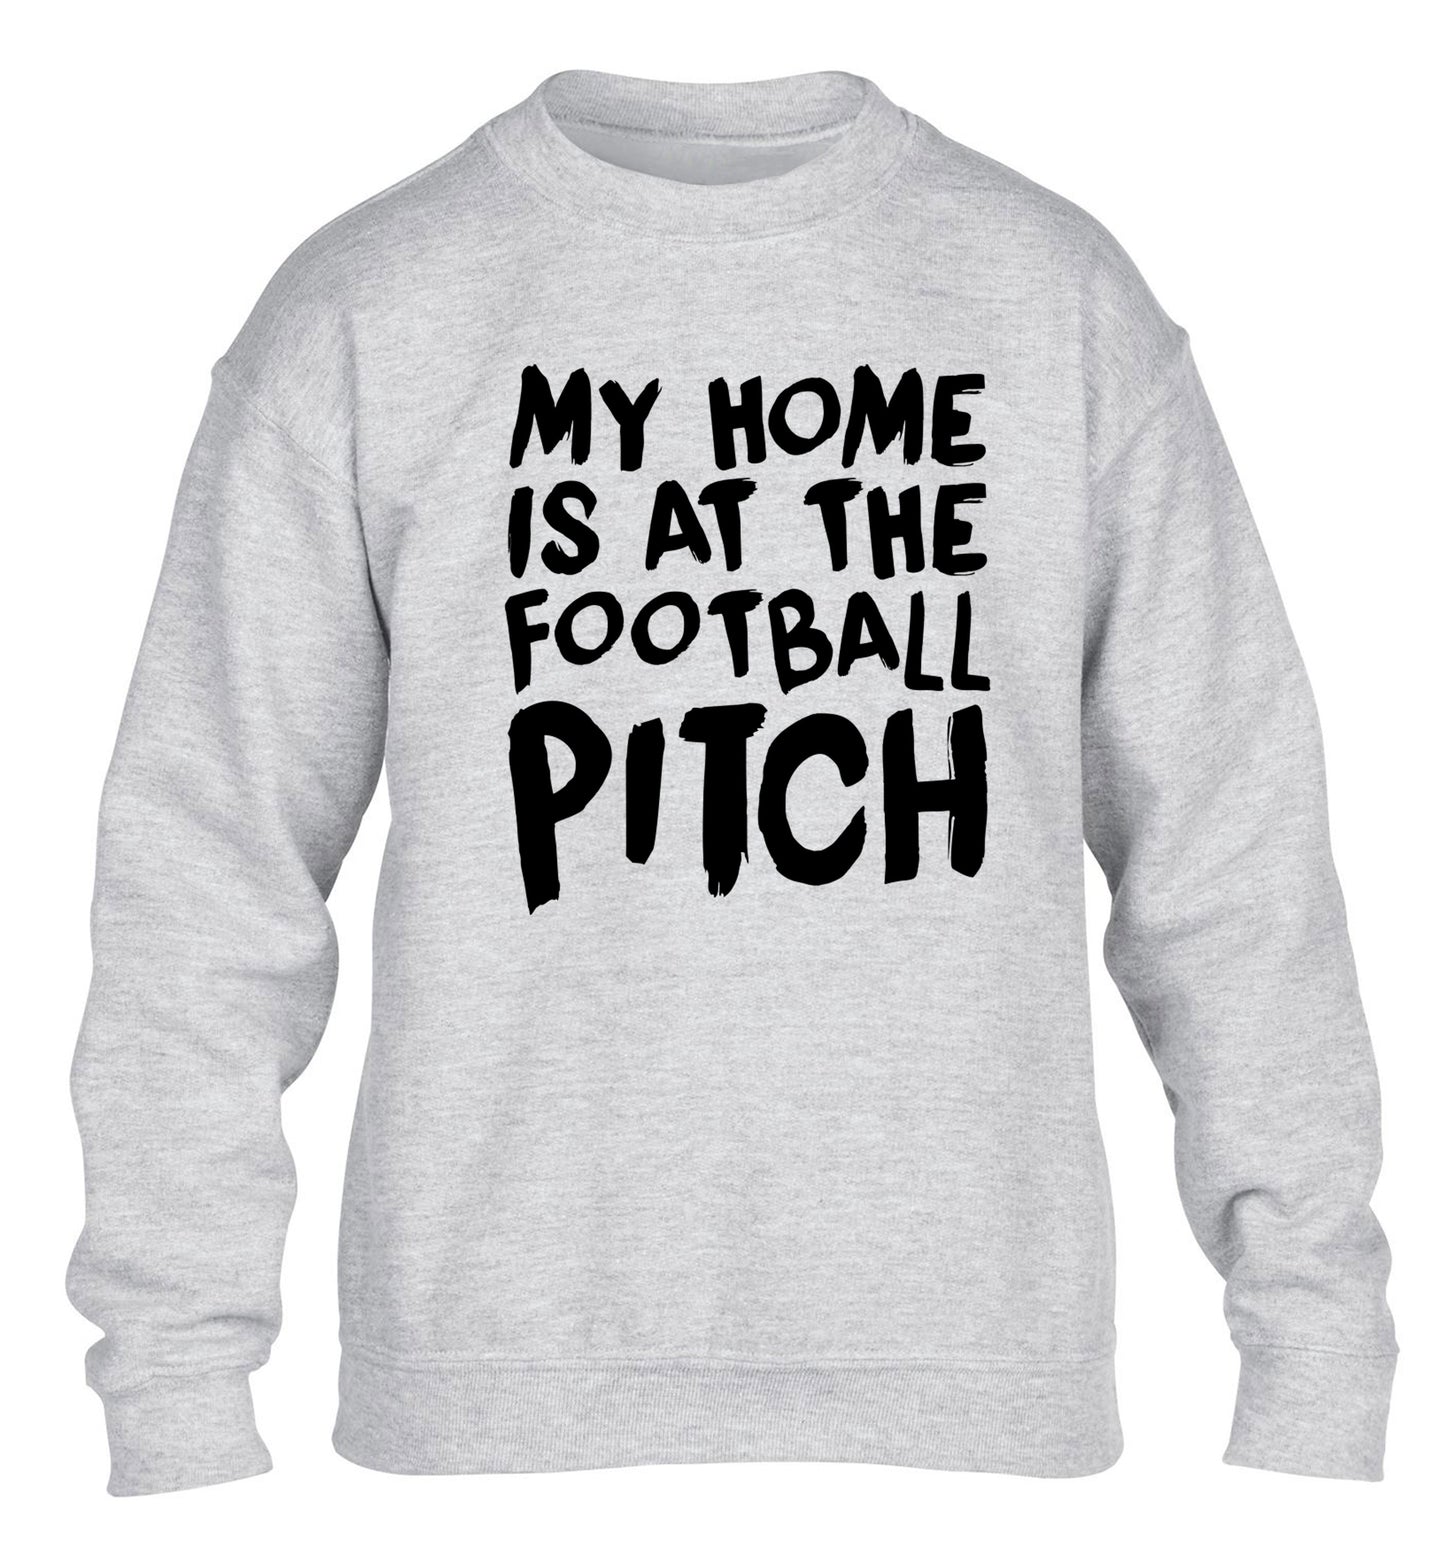 My home is at the football pitch children's grey sweater 12-14 Years